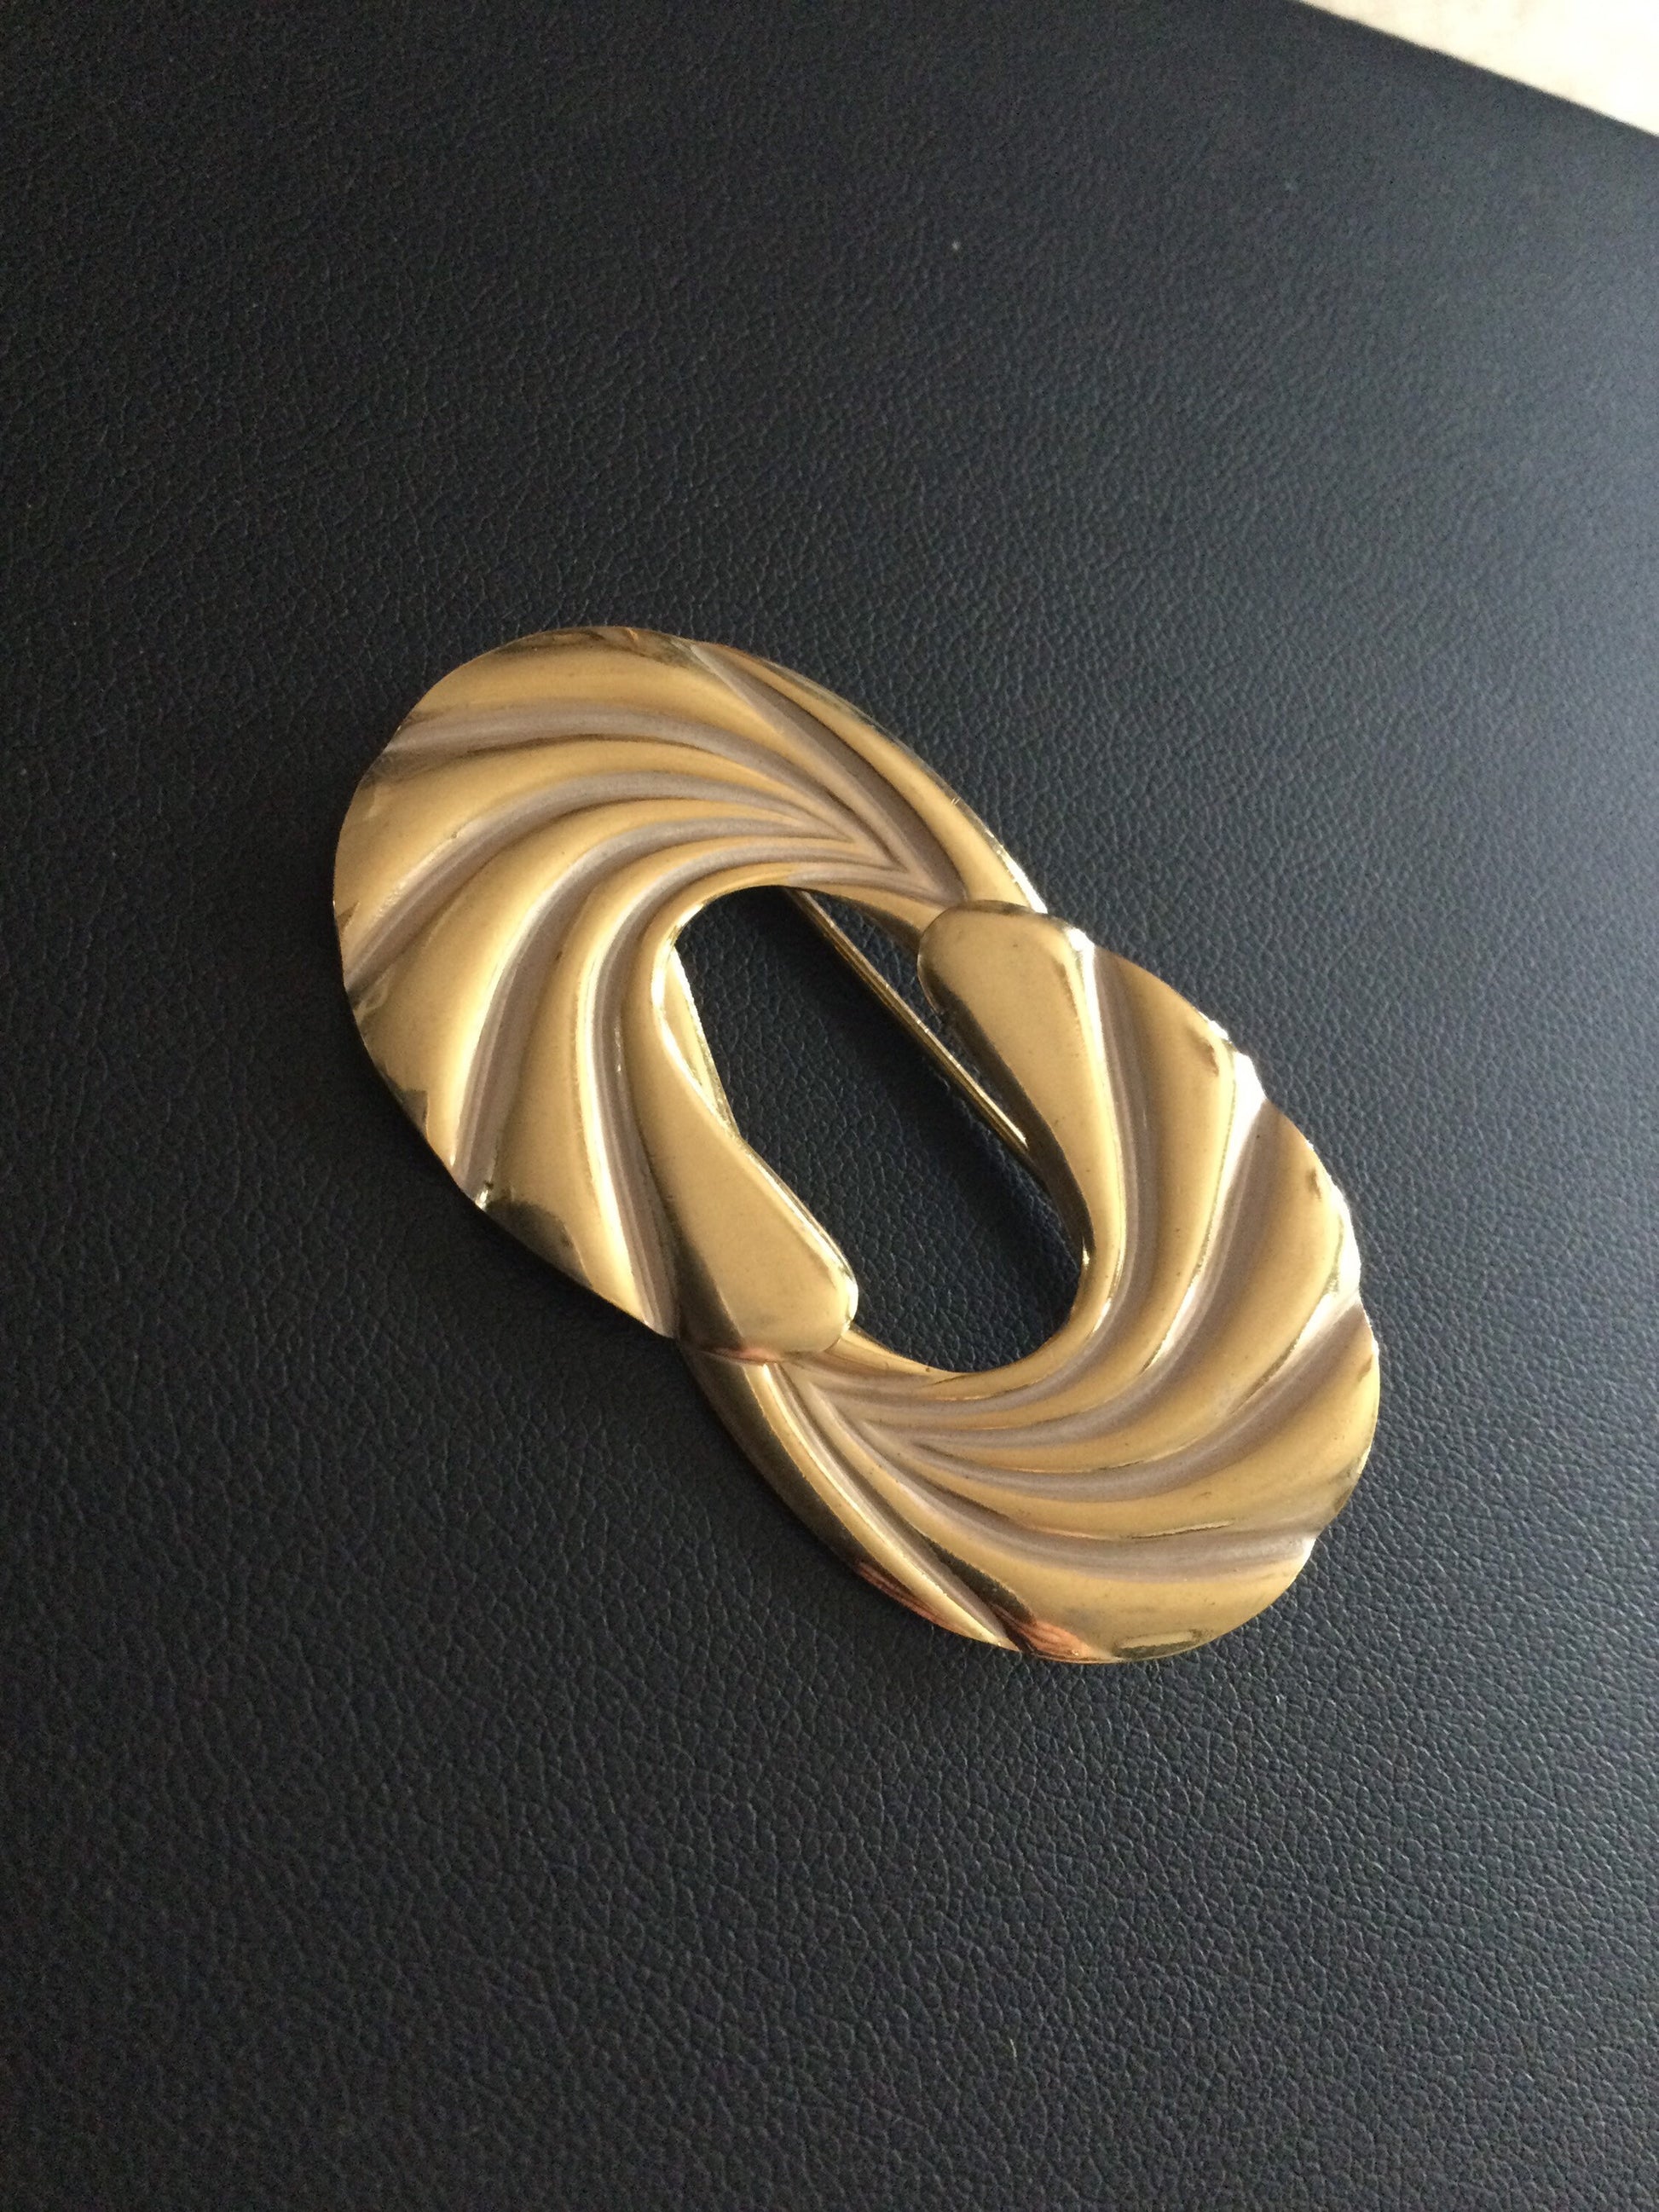 vintage gold & white silver tone enamel abstract swirl brooch roll clasp